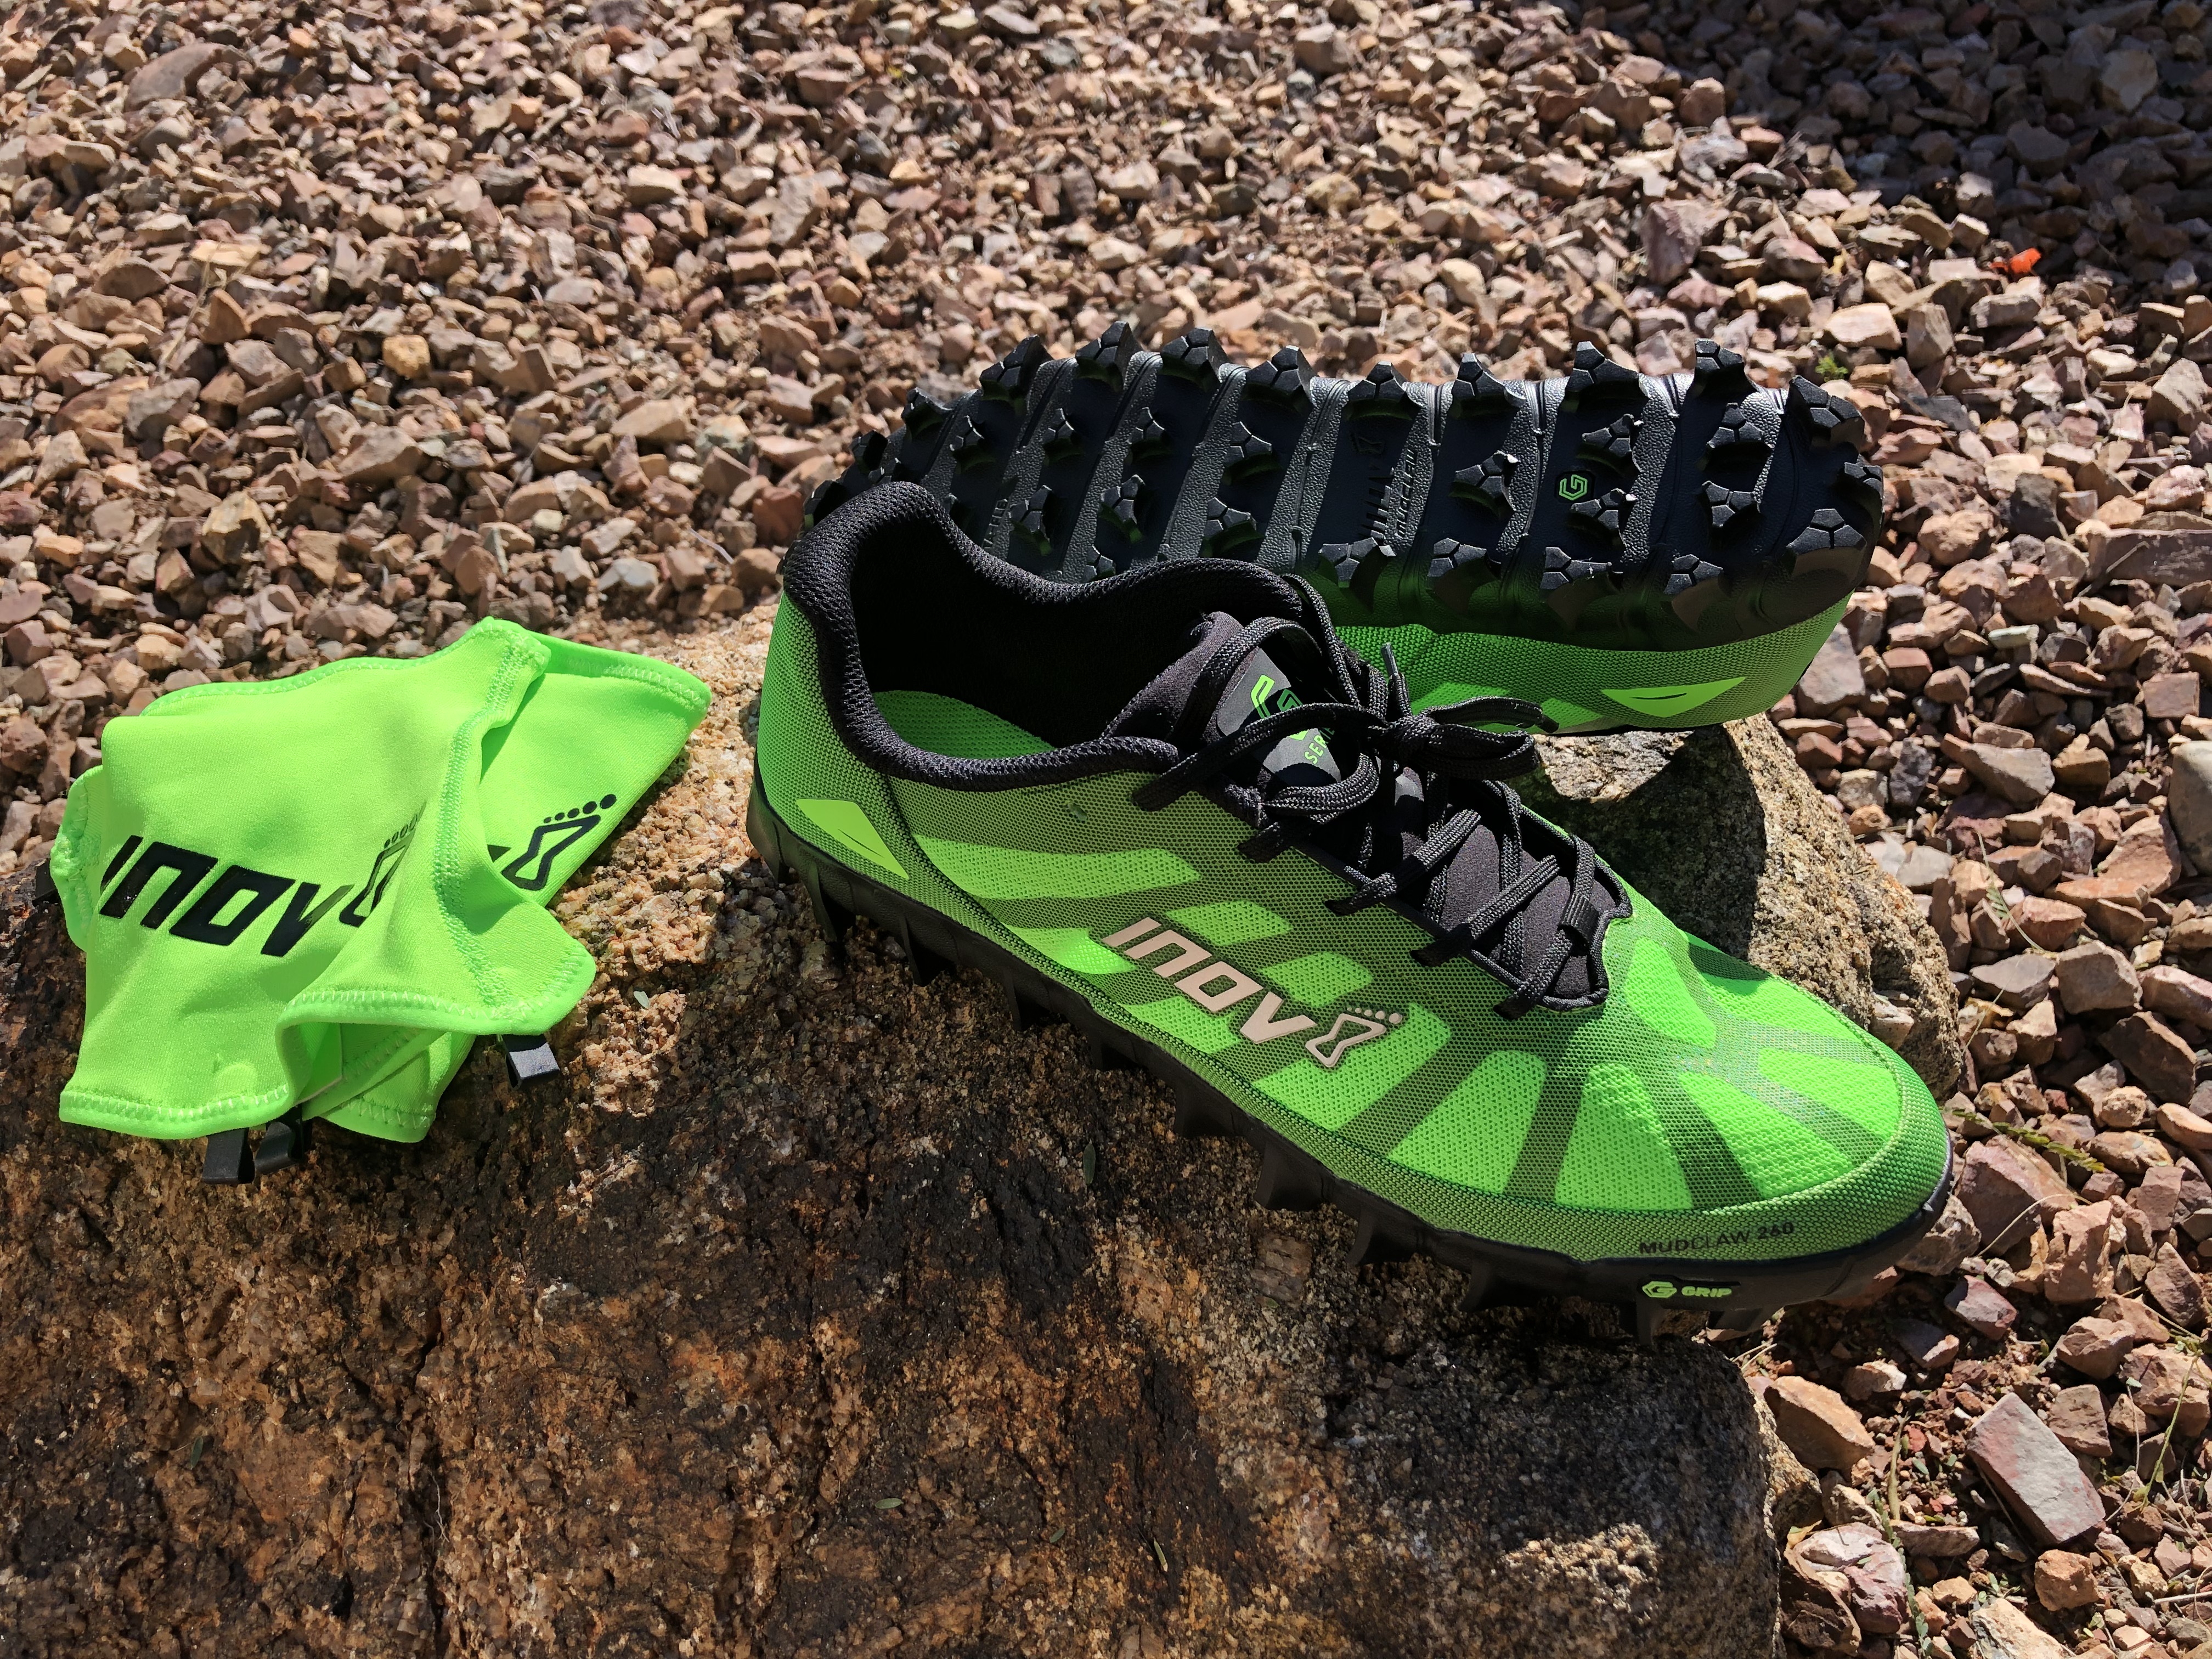 Soft Ground Inov-8 Mudclaw G 260 Spartan Races and Mud Running for Obstacle Super Durable Trail Running OCR Shoes 